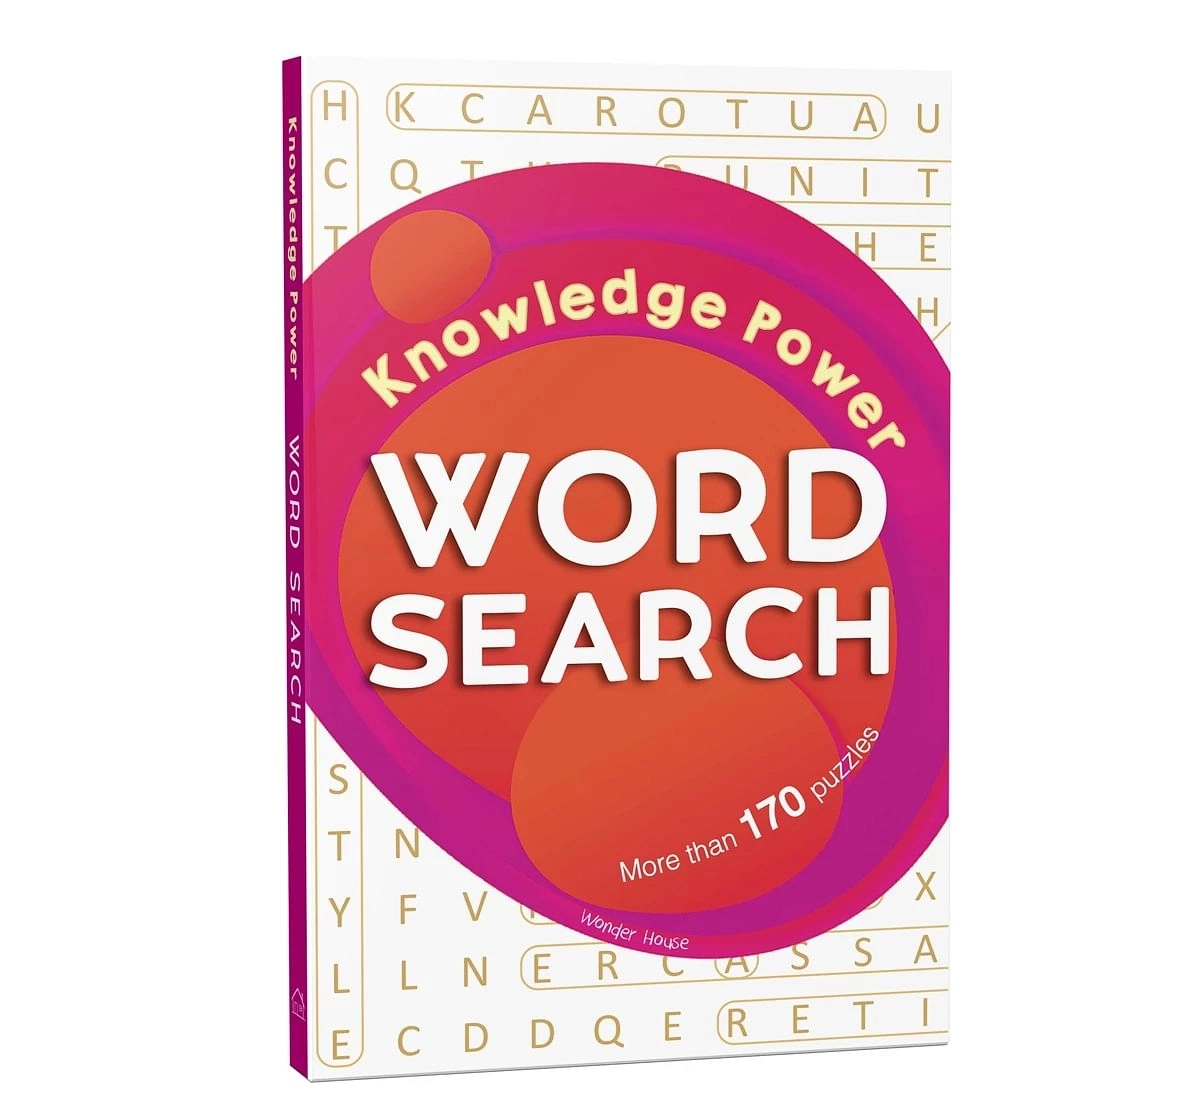 Wonder House Books the Mega Word Search Control Library Gift Boxset A Collection of 6 Books for kids 8Y+, Multicolour